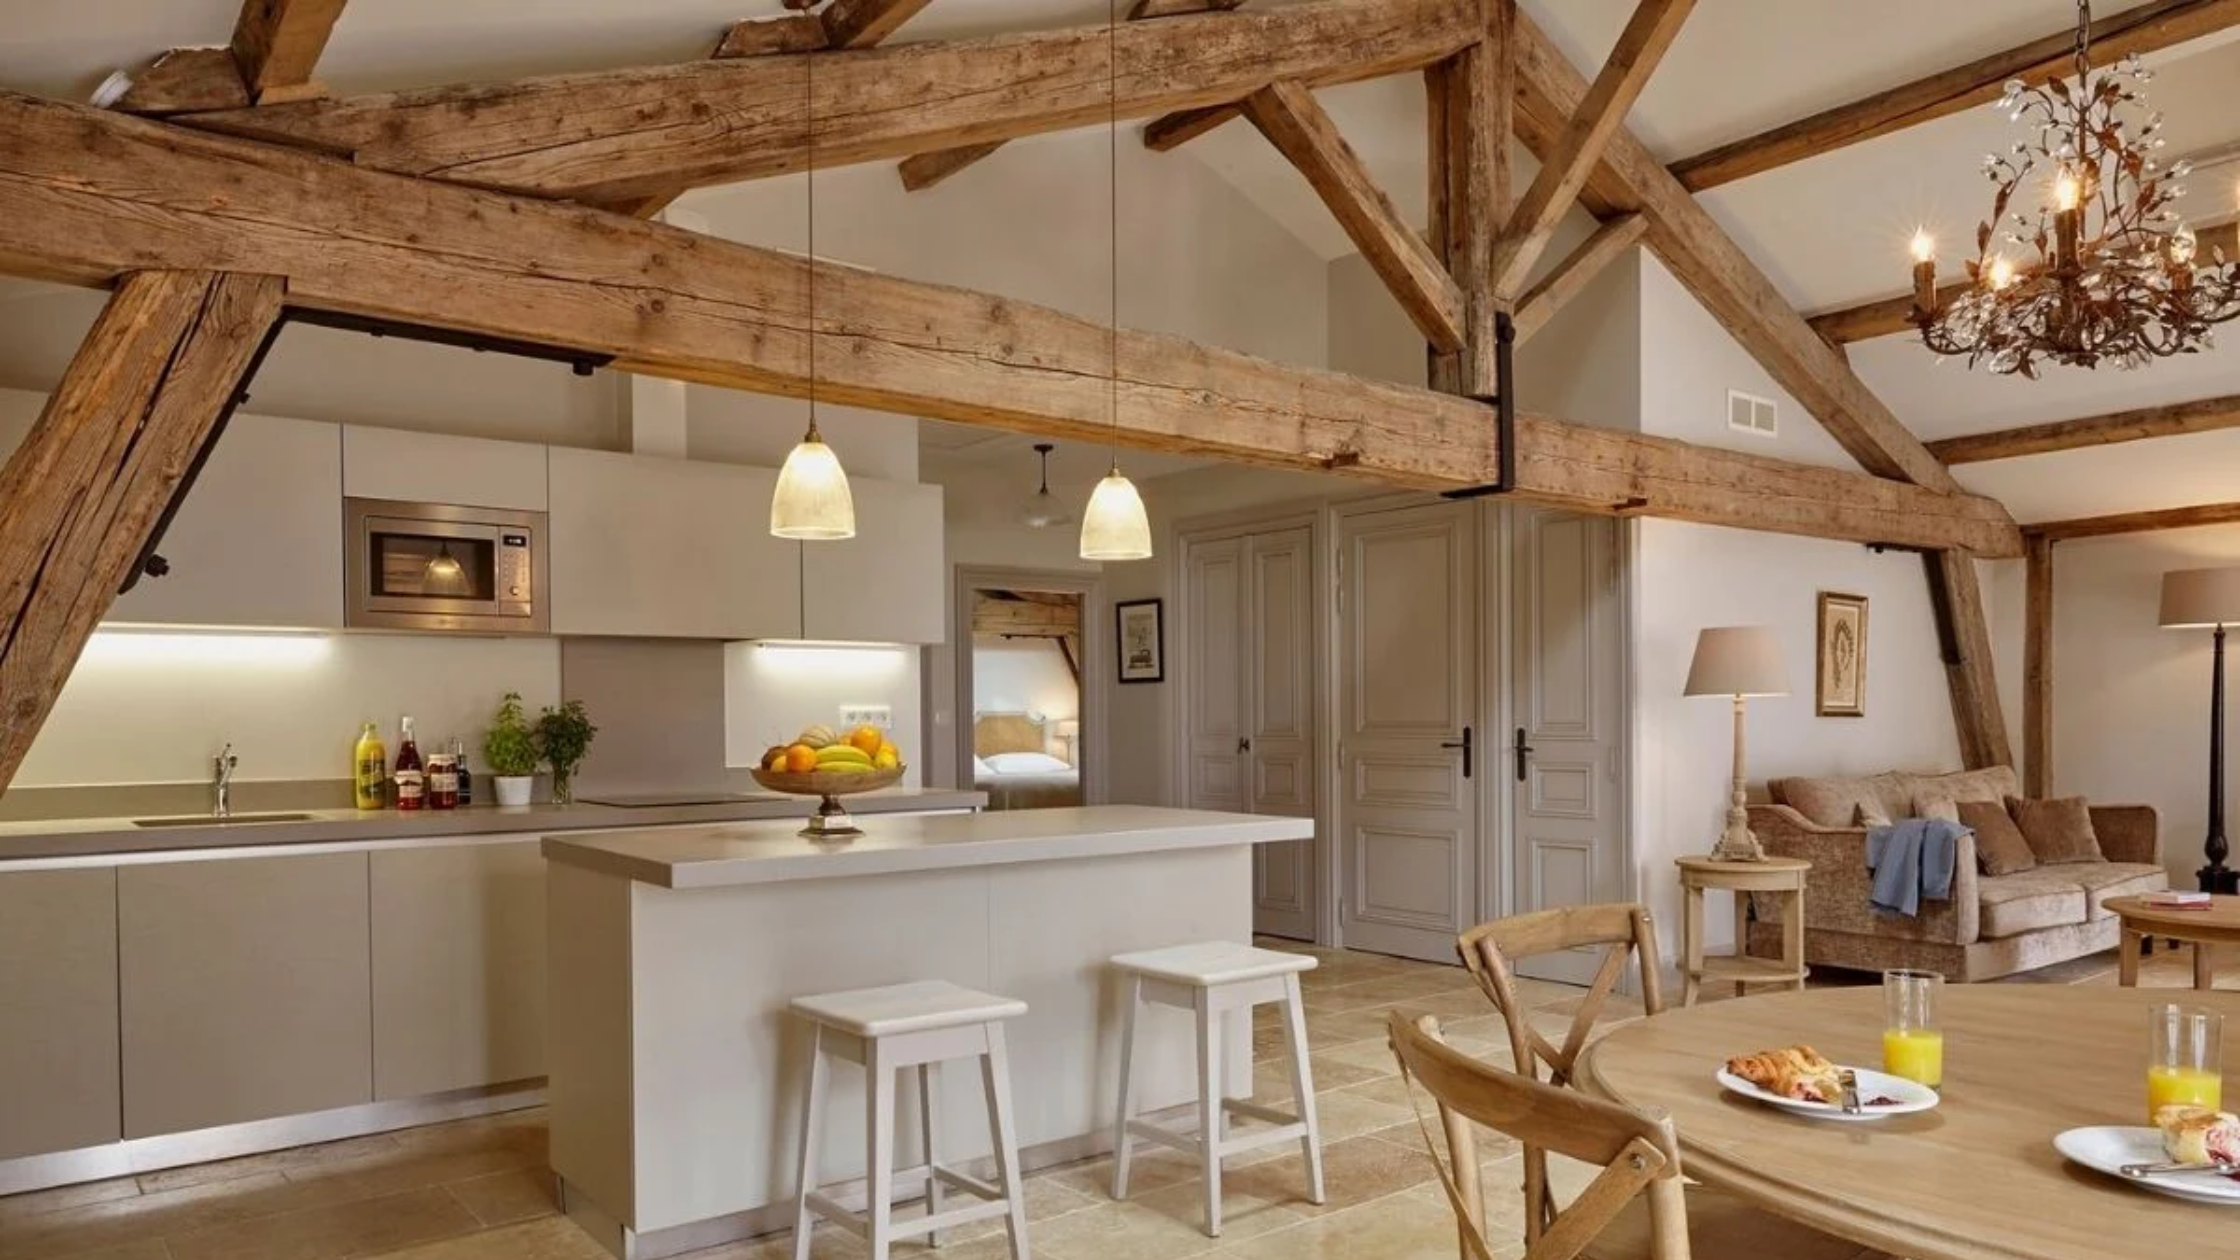 How to Light a Room with a Sloped or Vaulted Ceiling